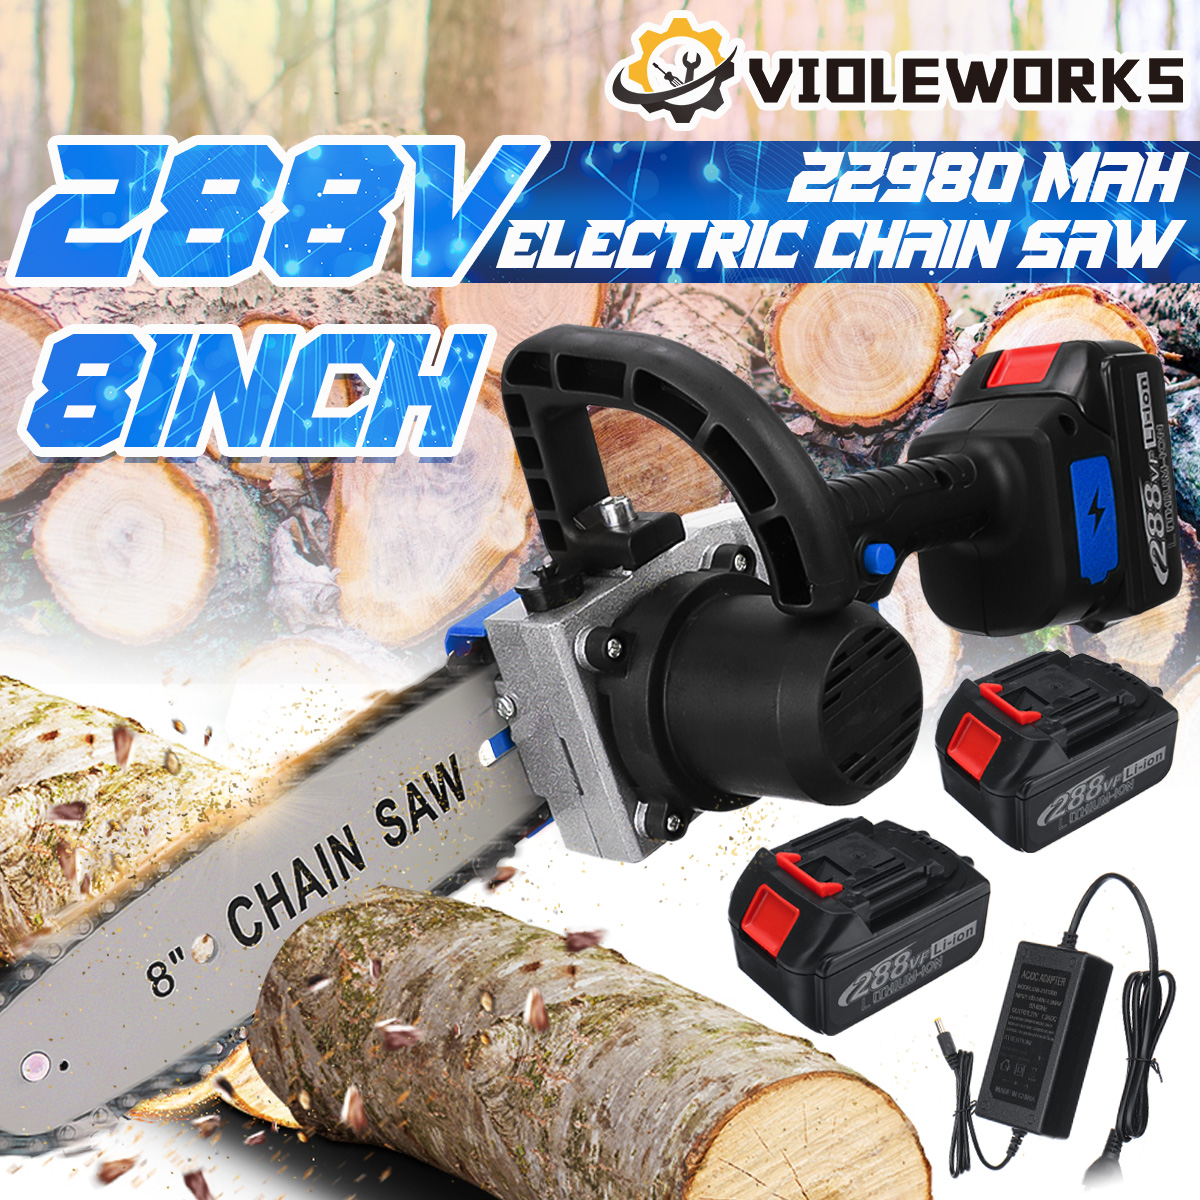 VIOLEWORKS-288VF-8Inch-Electric-Cordless-One-Hand-Saw-Chain-Saw-22980-mAh-Woodworking-Rechargable-Ch-1848005-3